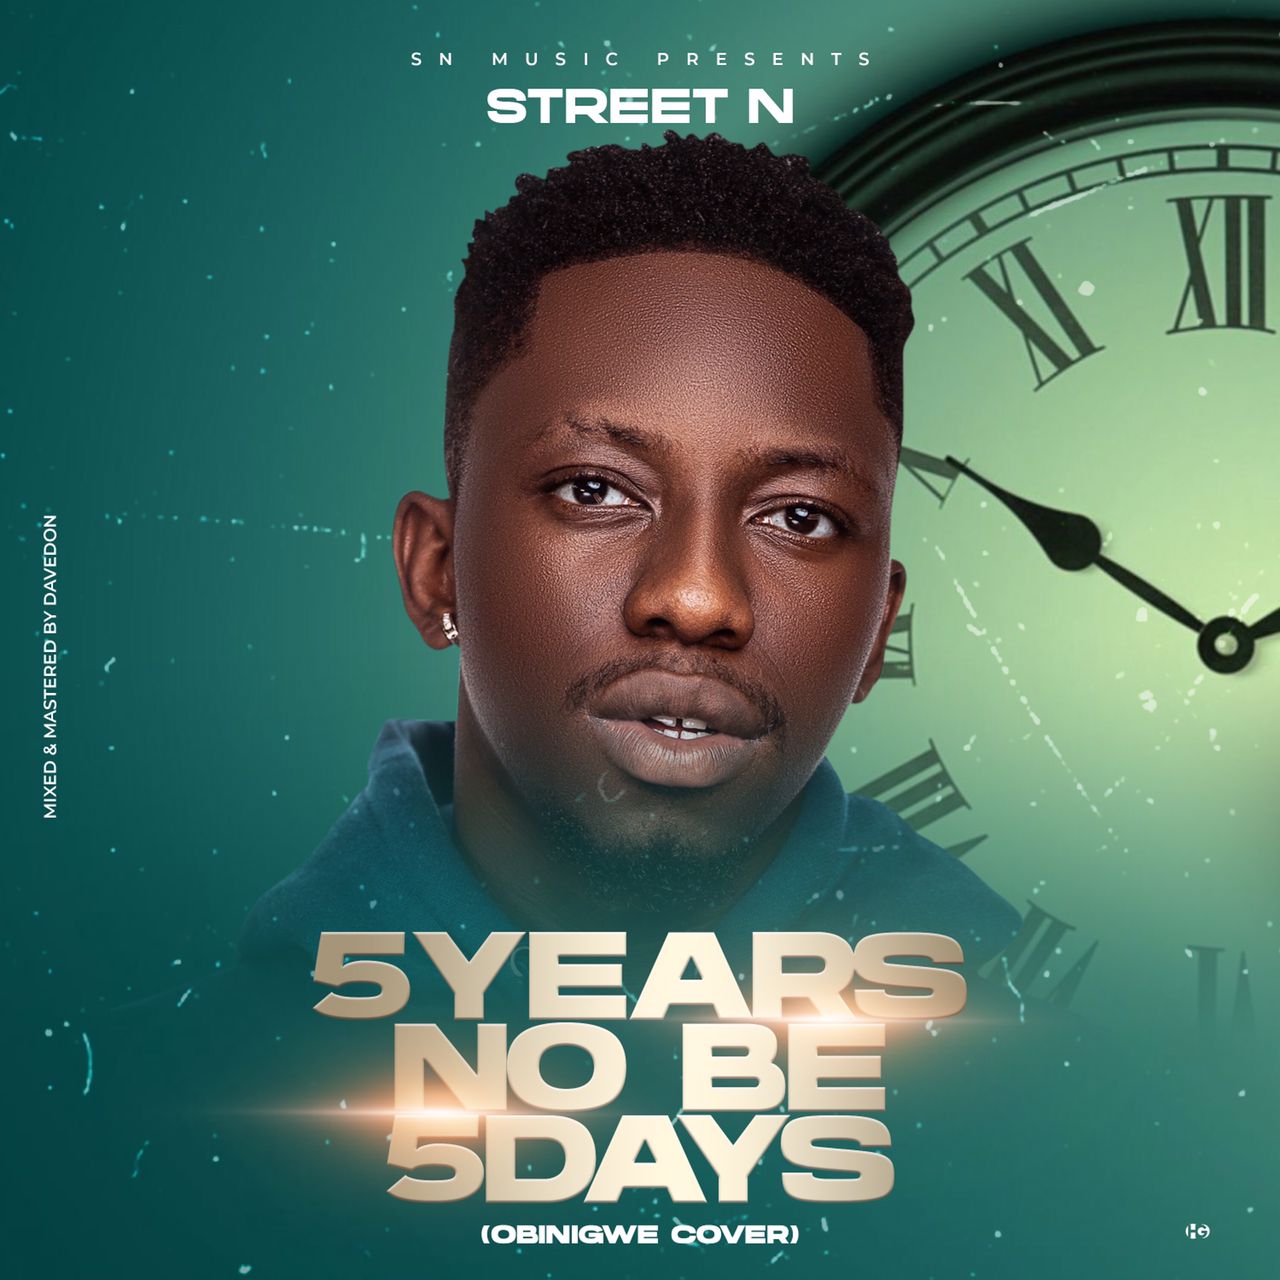 Street N - 5Years No Be 5Days Mp3 Download, Trendybeatz Music Street N - 5Years No Be 5Days Mp3 Download, Trendybeatz.com, xclusiveloaded.com Street N - 5Years No Be 5Days Mp3 Download, HiphopKit.com Street N - 5Years No Be 5Days Mp3 Download, 5years no be 5days song by street n, Download mp3 music street n 5years no be 5days